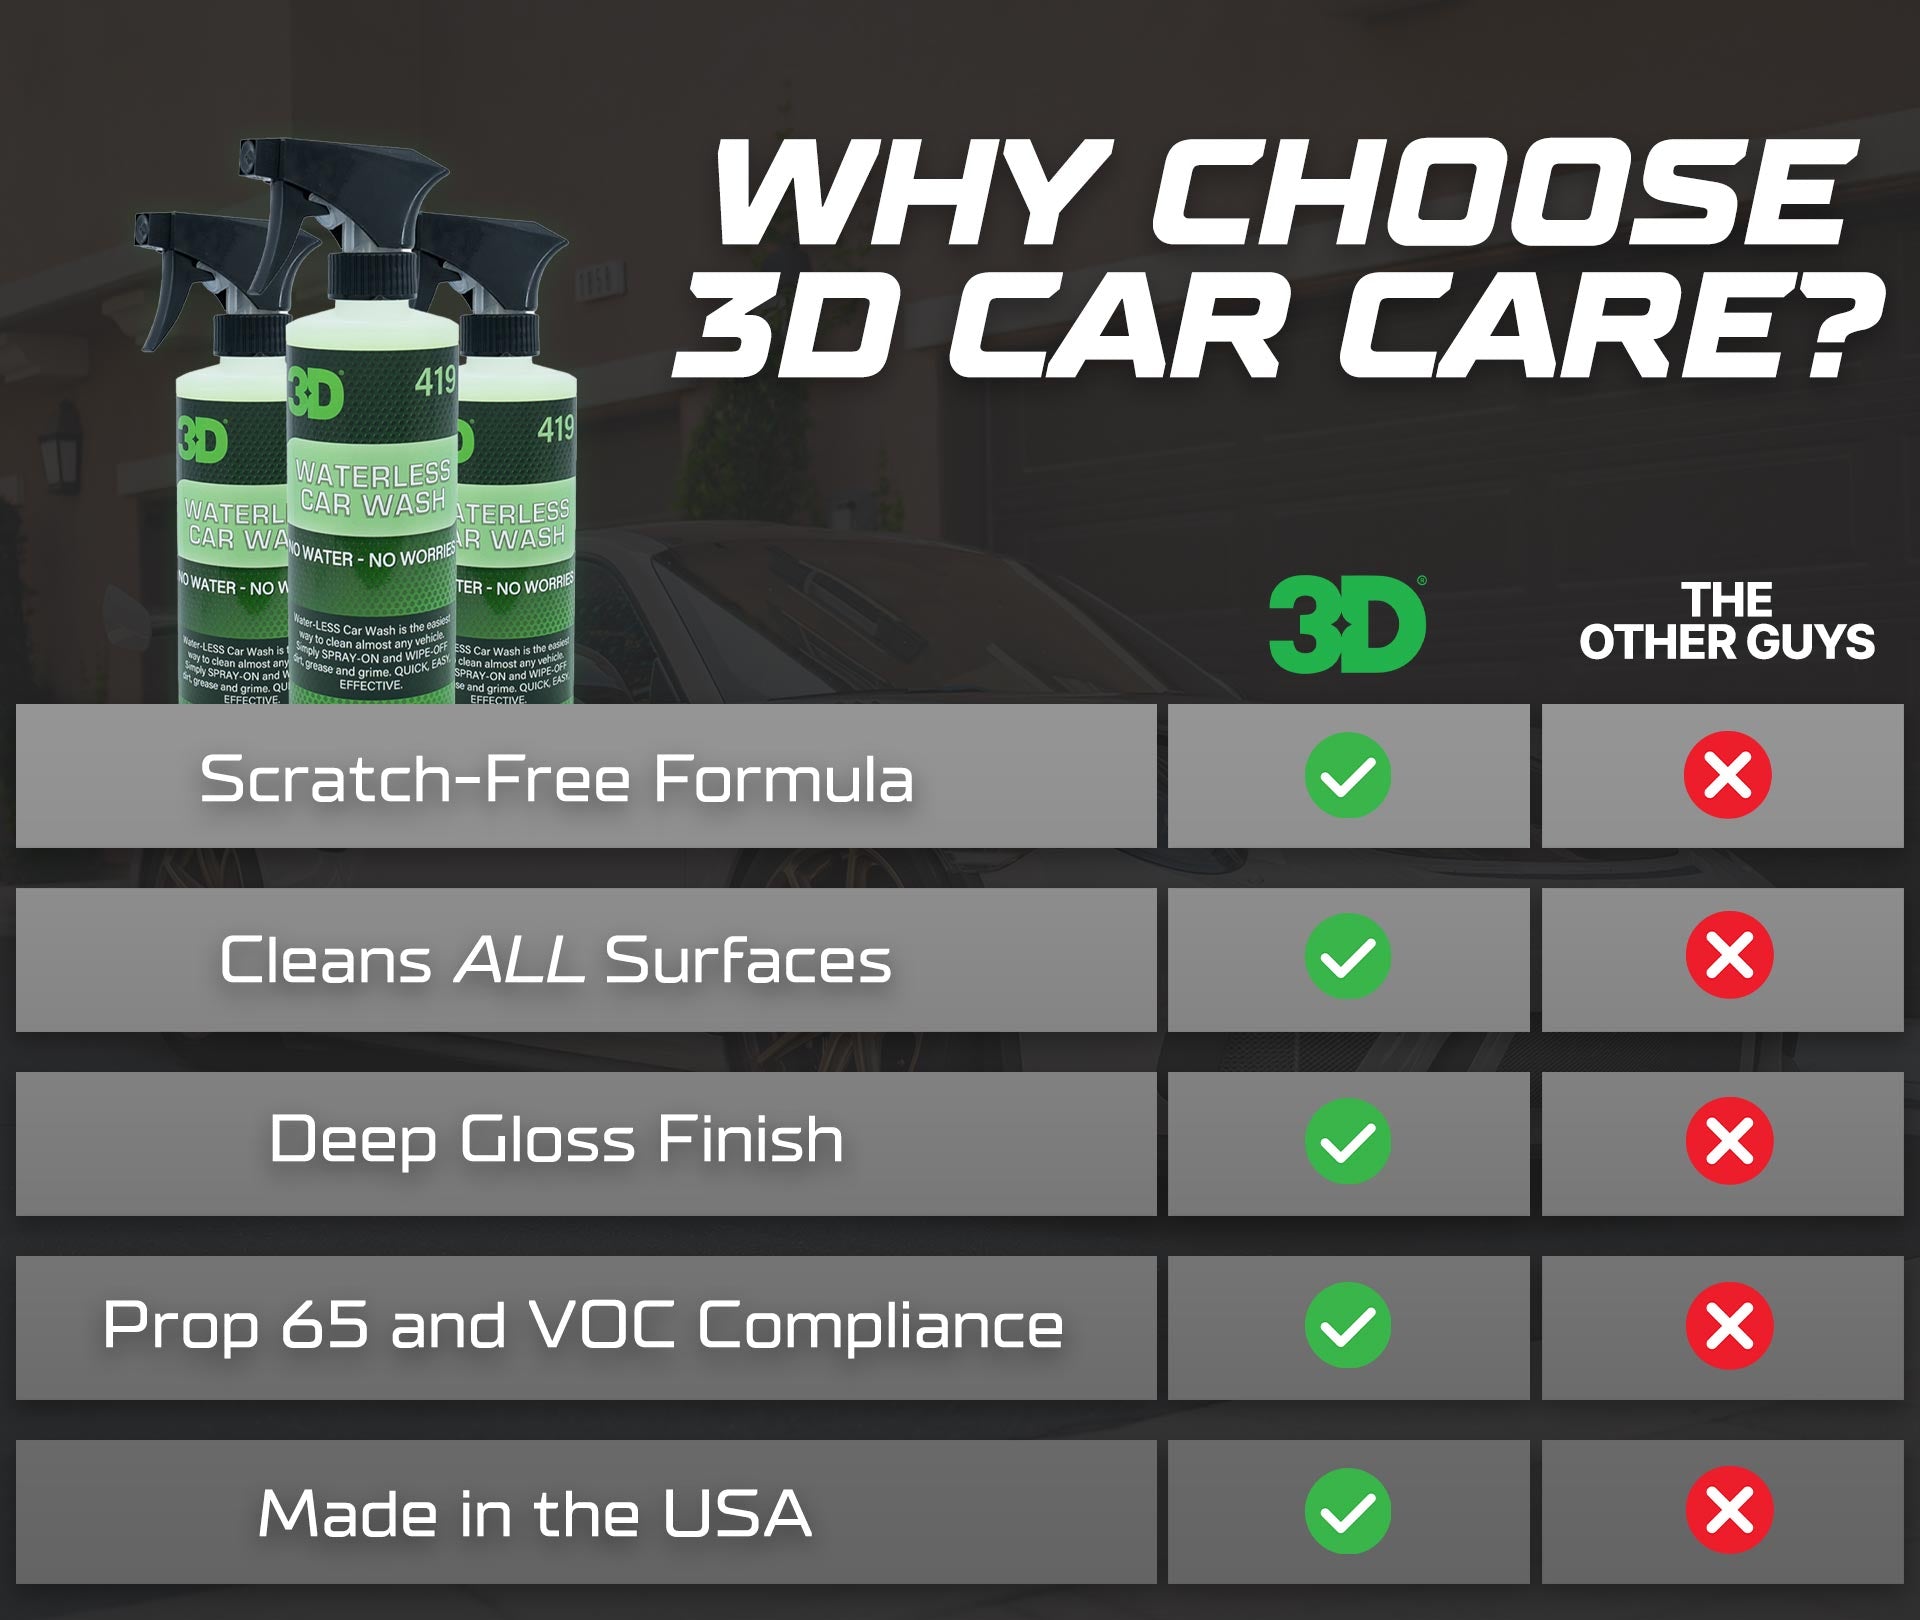 3d car care waterless car wash vs other brands chart